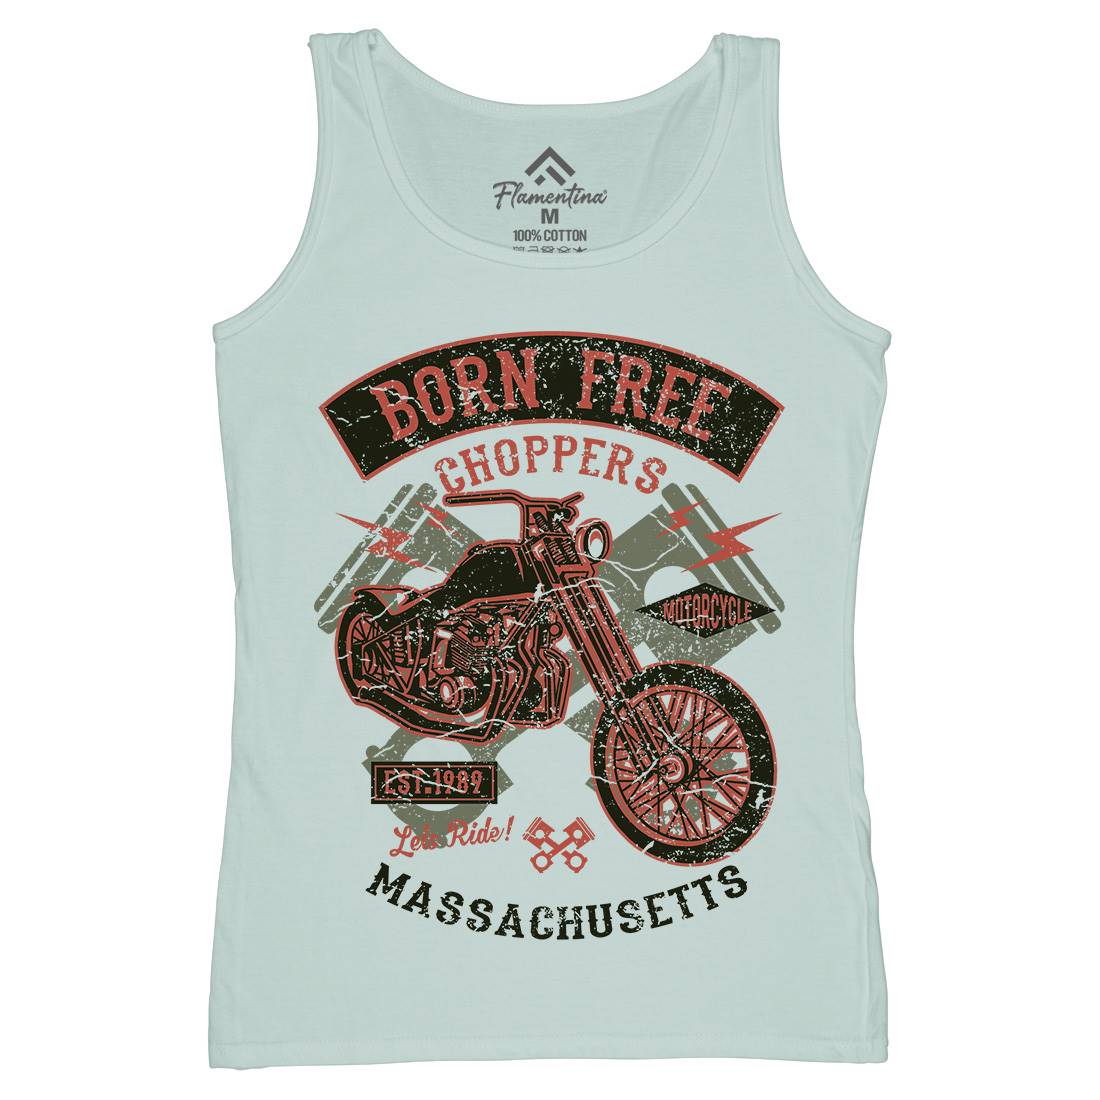 Born Free Choppers Womens Organic Tank Top Vest Motorcycles A018